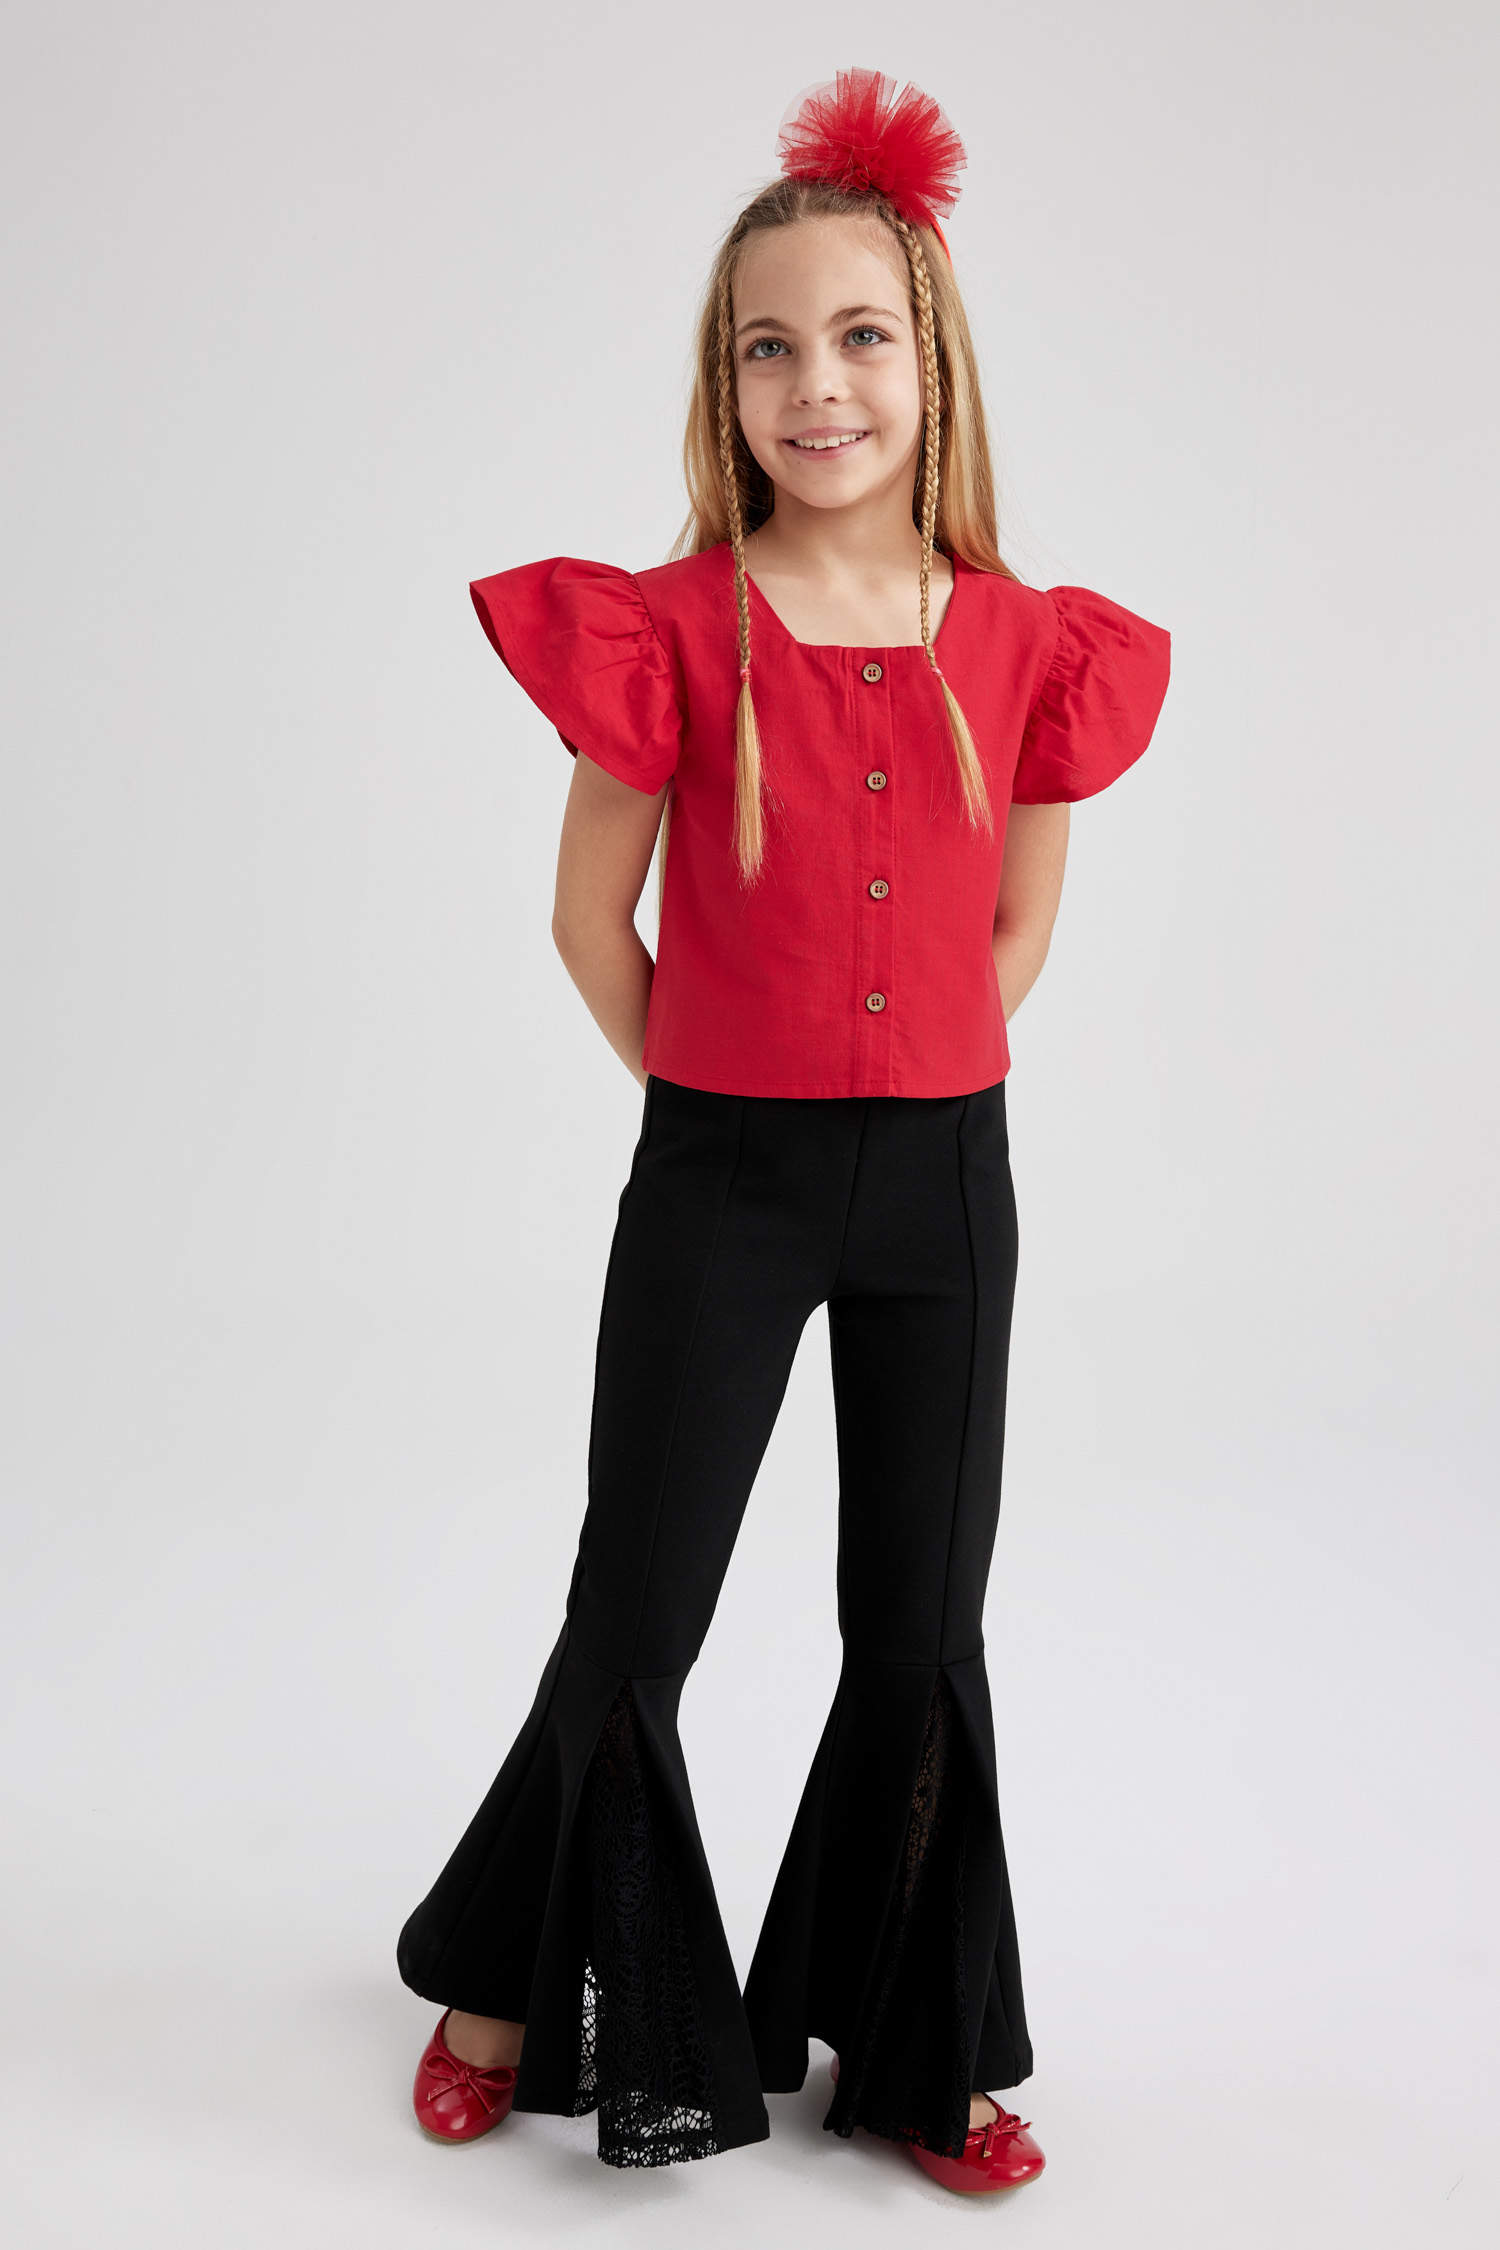 Black GIRLS & TEENS Girls Child April 23 Flared Trousers 2745056 | DeFacto